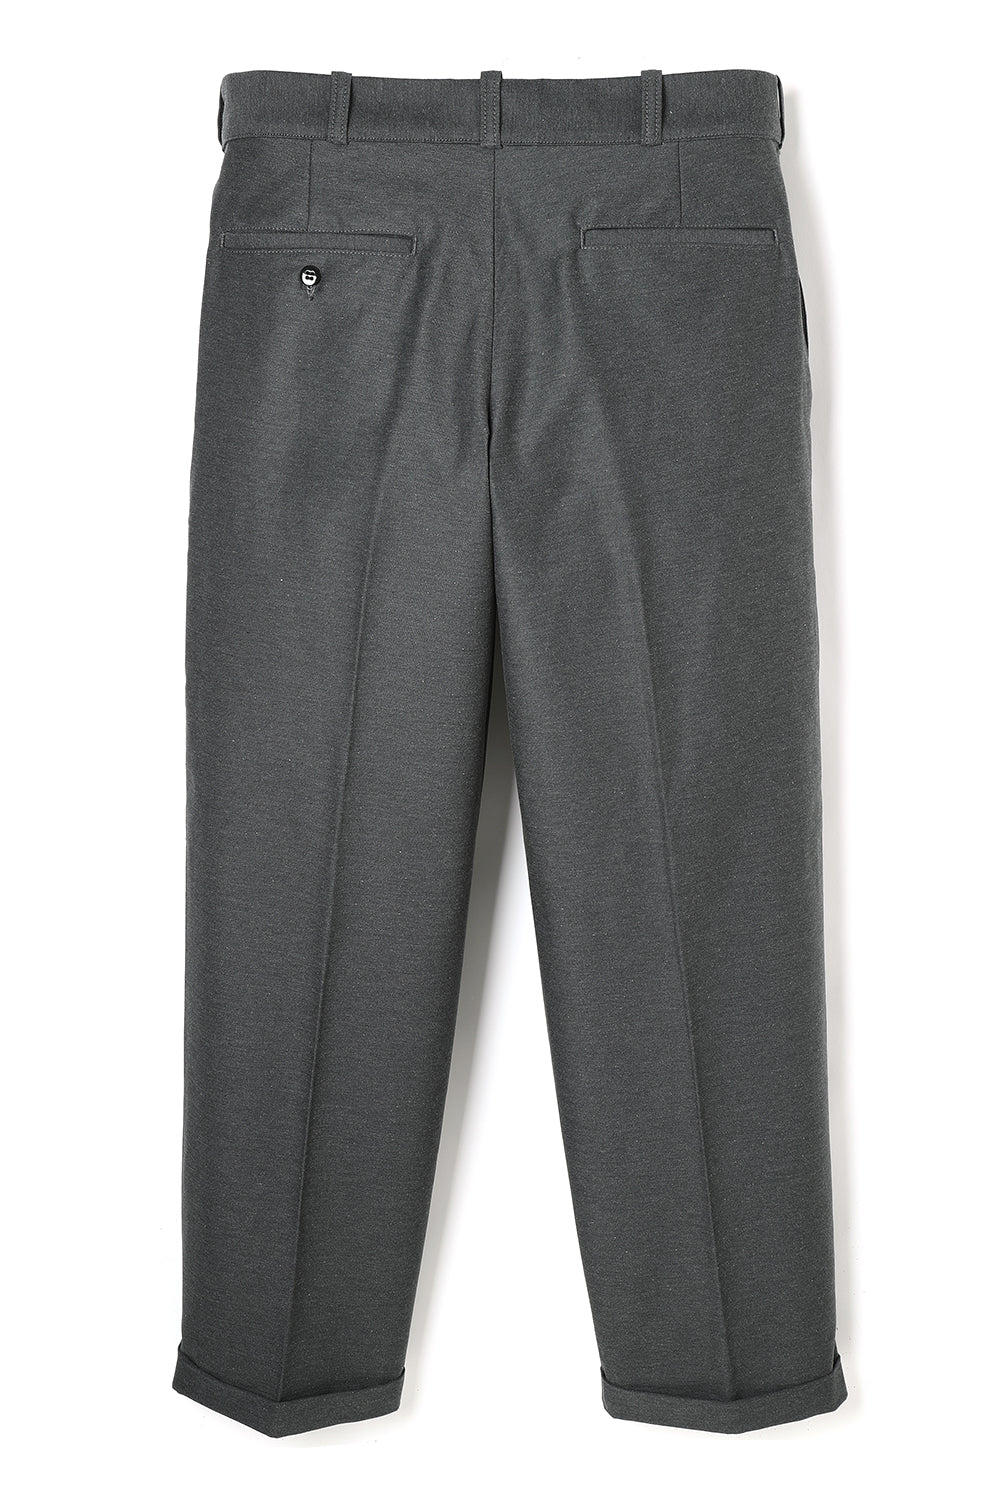 Lot.720 Heritage Trousers -Charcoal- – ATTRACTIONS